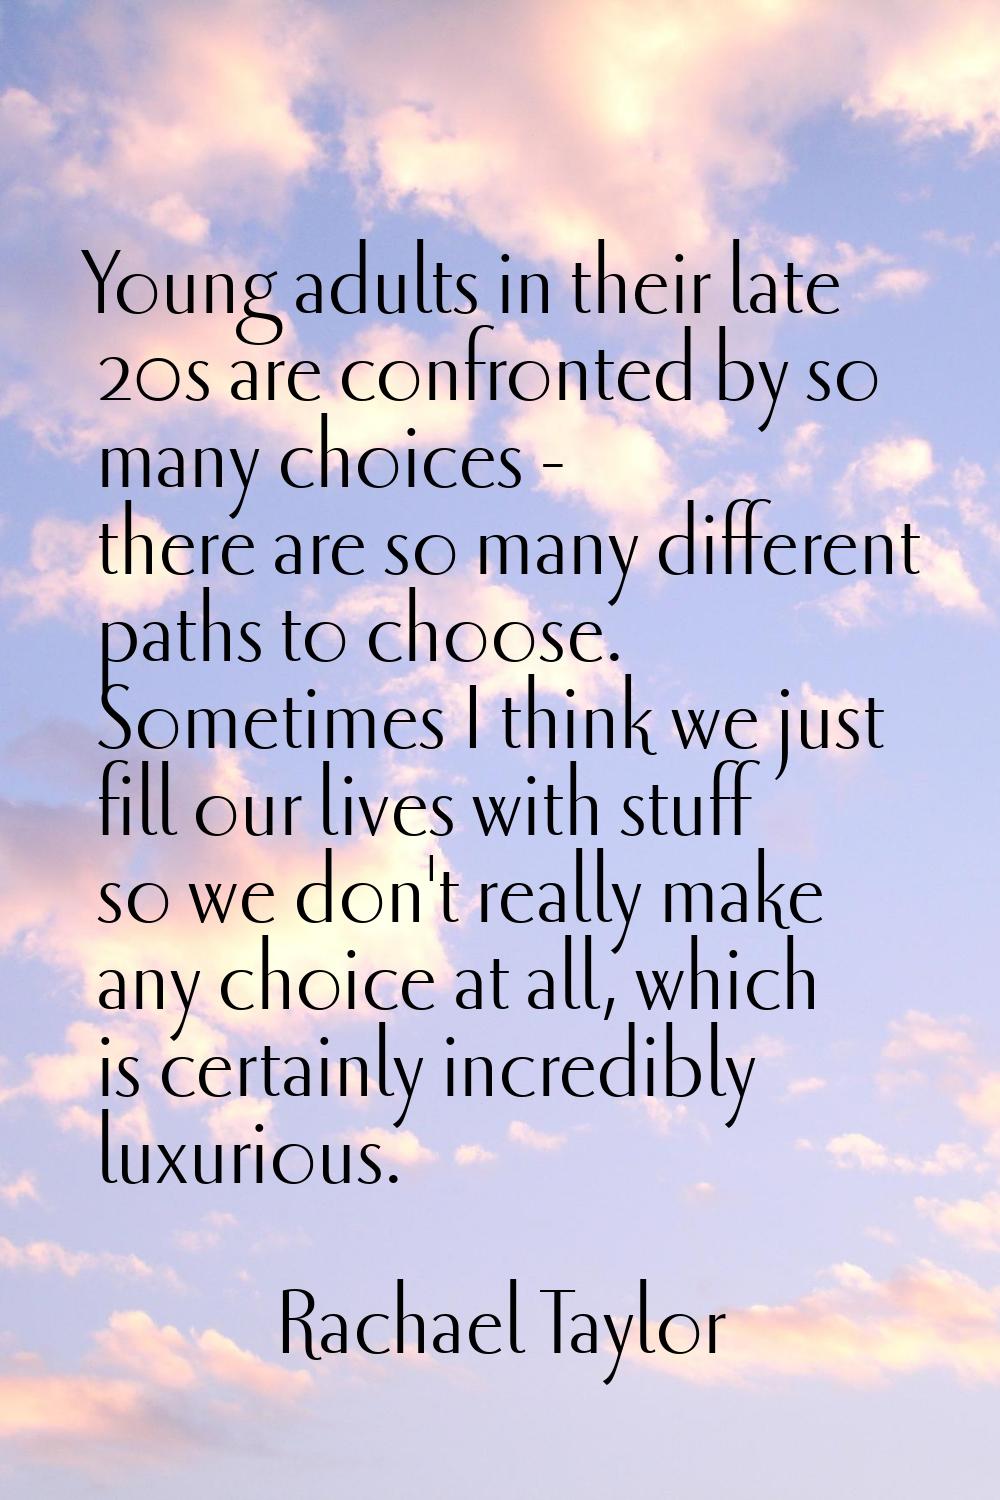 Young adults in their late 20s are confronted by so many choices - there are so many different path